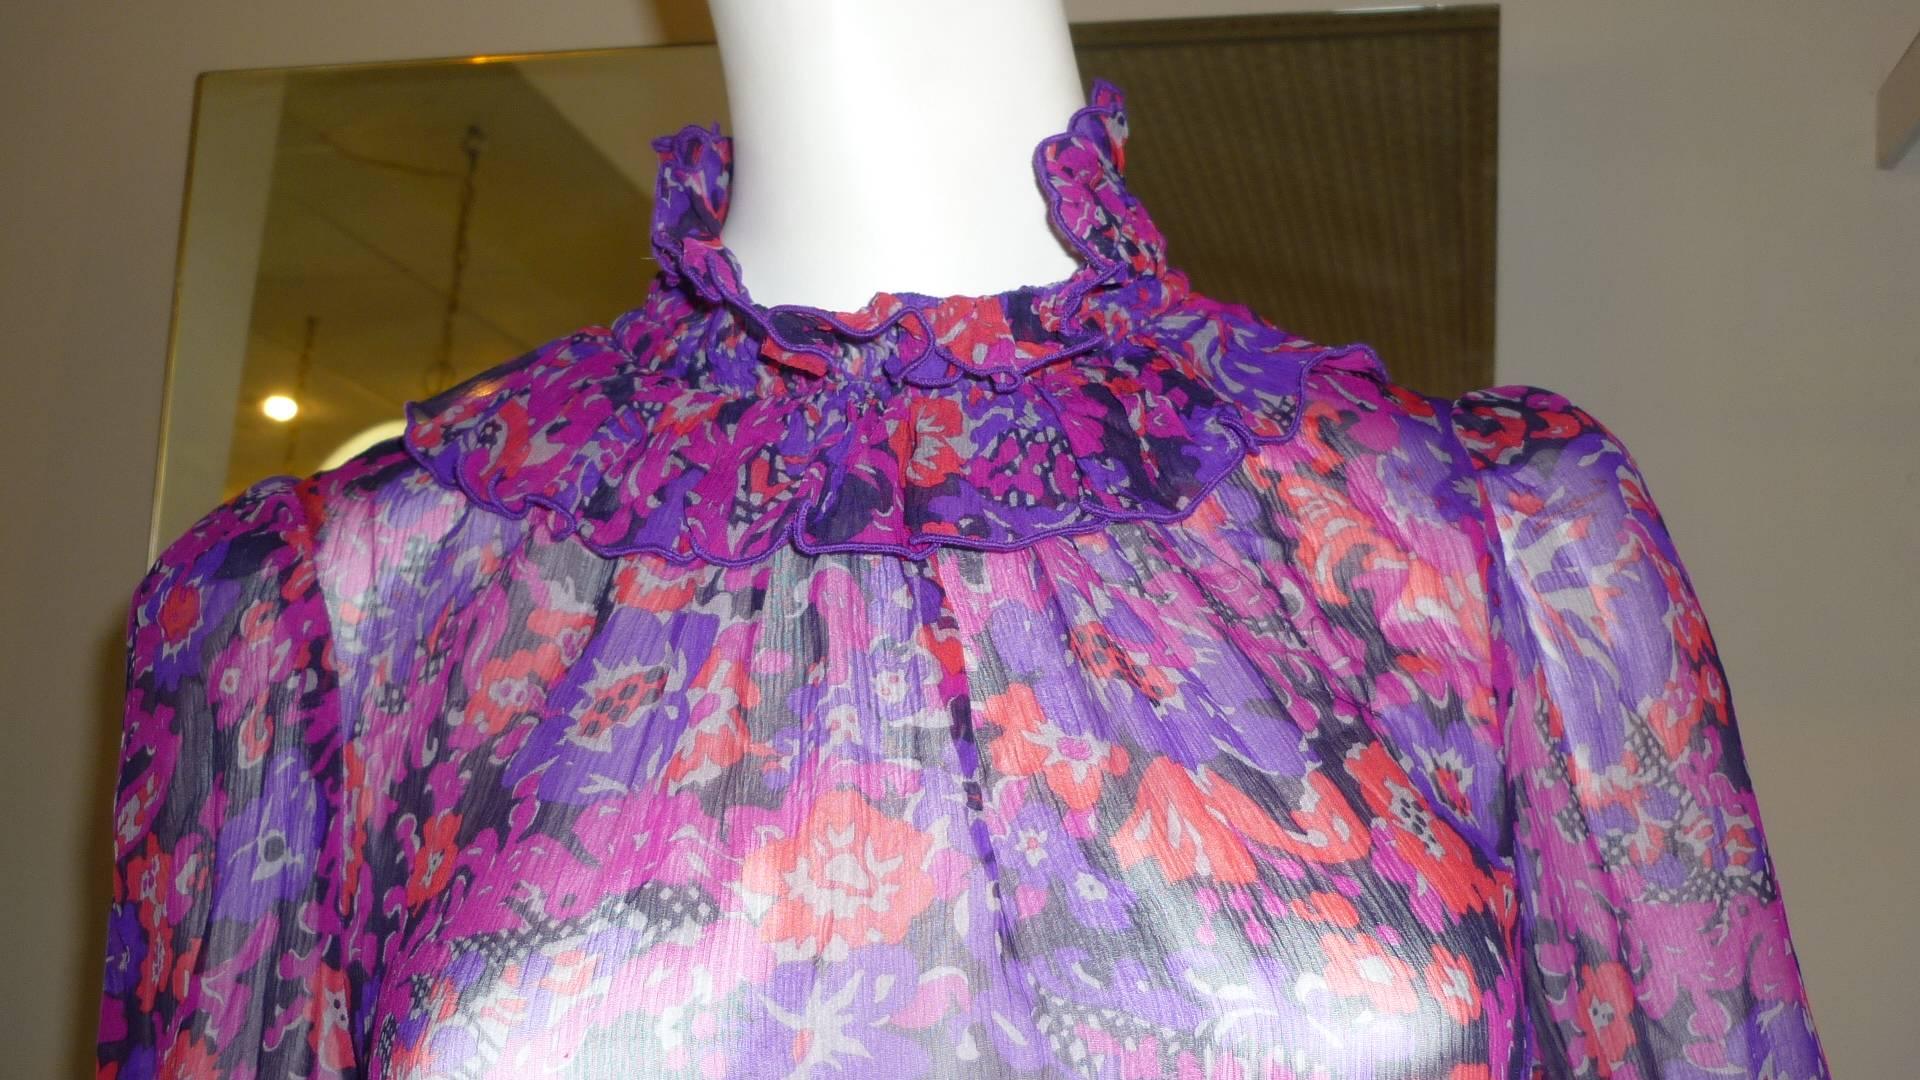 Purples, reds and blues are the dominant colors in this lovely dress with a high ruffle collar; ruffled sleeves and a swag skirt.

There is a 20s feel to this dress.

Closure is by two buttons on the back.